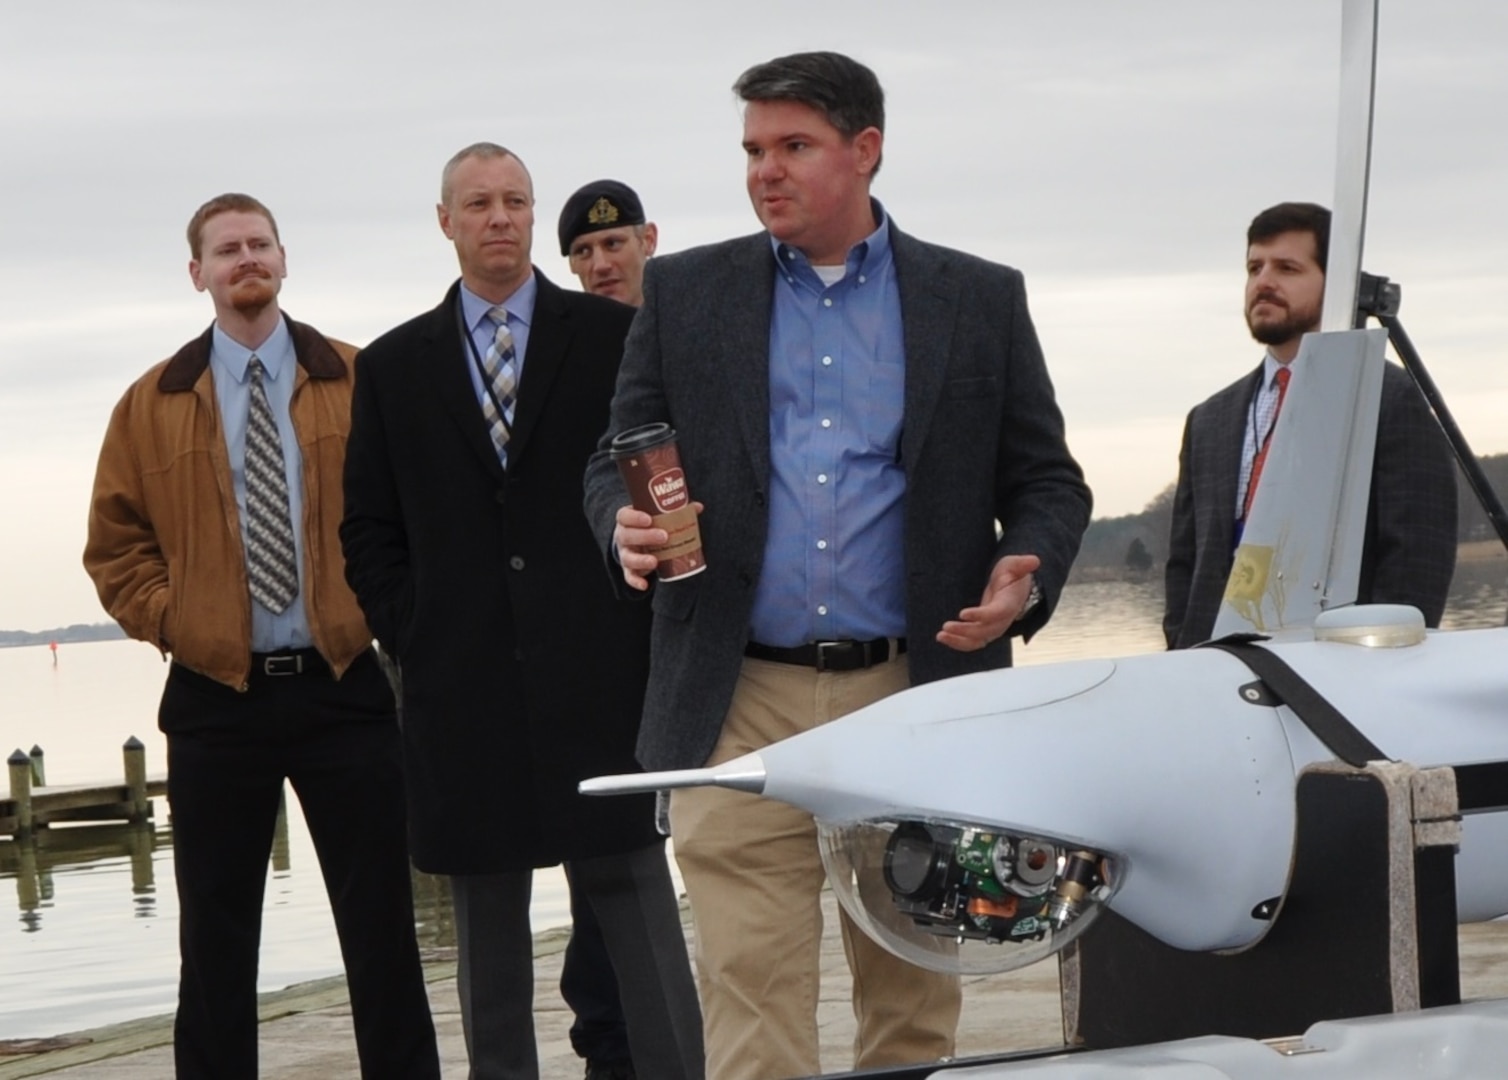 IMAGE: DAHLGREN, Va. (March 28, 2018) - Navy scientist Dr. Chris Weiland briefs visitors on the coordinated use of unmanned aerial vehicles for intelligence and targeting at a demonstration of the Surface and Expeditionary Warfare Mission Module that will be integrated in the developmental Common Unmanned Surface Vehicle (CUSV). The mission module comprises engagement system technology developed by Naval Surface Warfare Center Dahlgren Division coupled with a Battle Management System that controls munitions such as the Longbow Hellfire Missile. The event comes on the heels of a cooperative research and development agreement that NSWCDD signed with Textron Systems who makes the CUSV. The agreement covers the integration of missile, designator, and remote weapon station payloads to the CUSV with its 3,500-pound payload capacity on the deck and a payload bay measuring 20.5 x 6.5 feet.  (